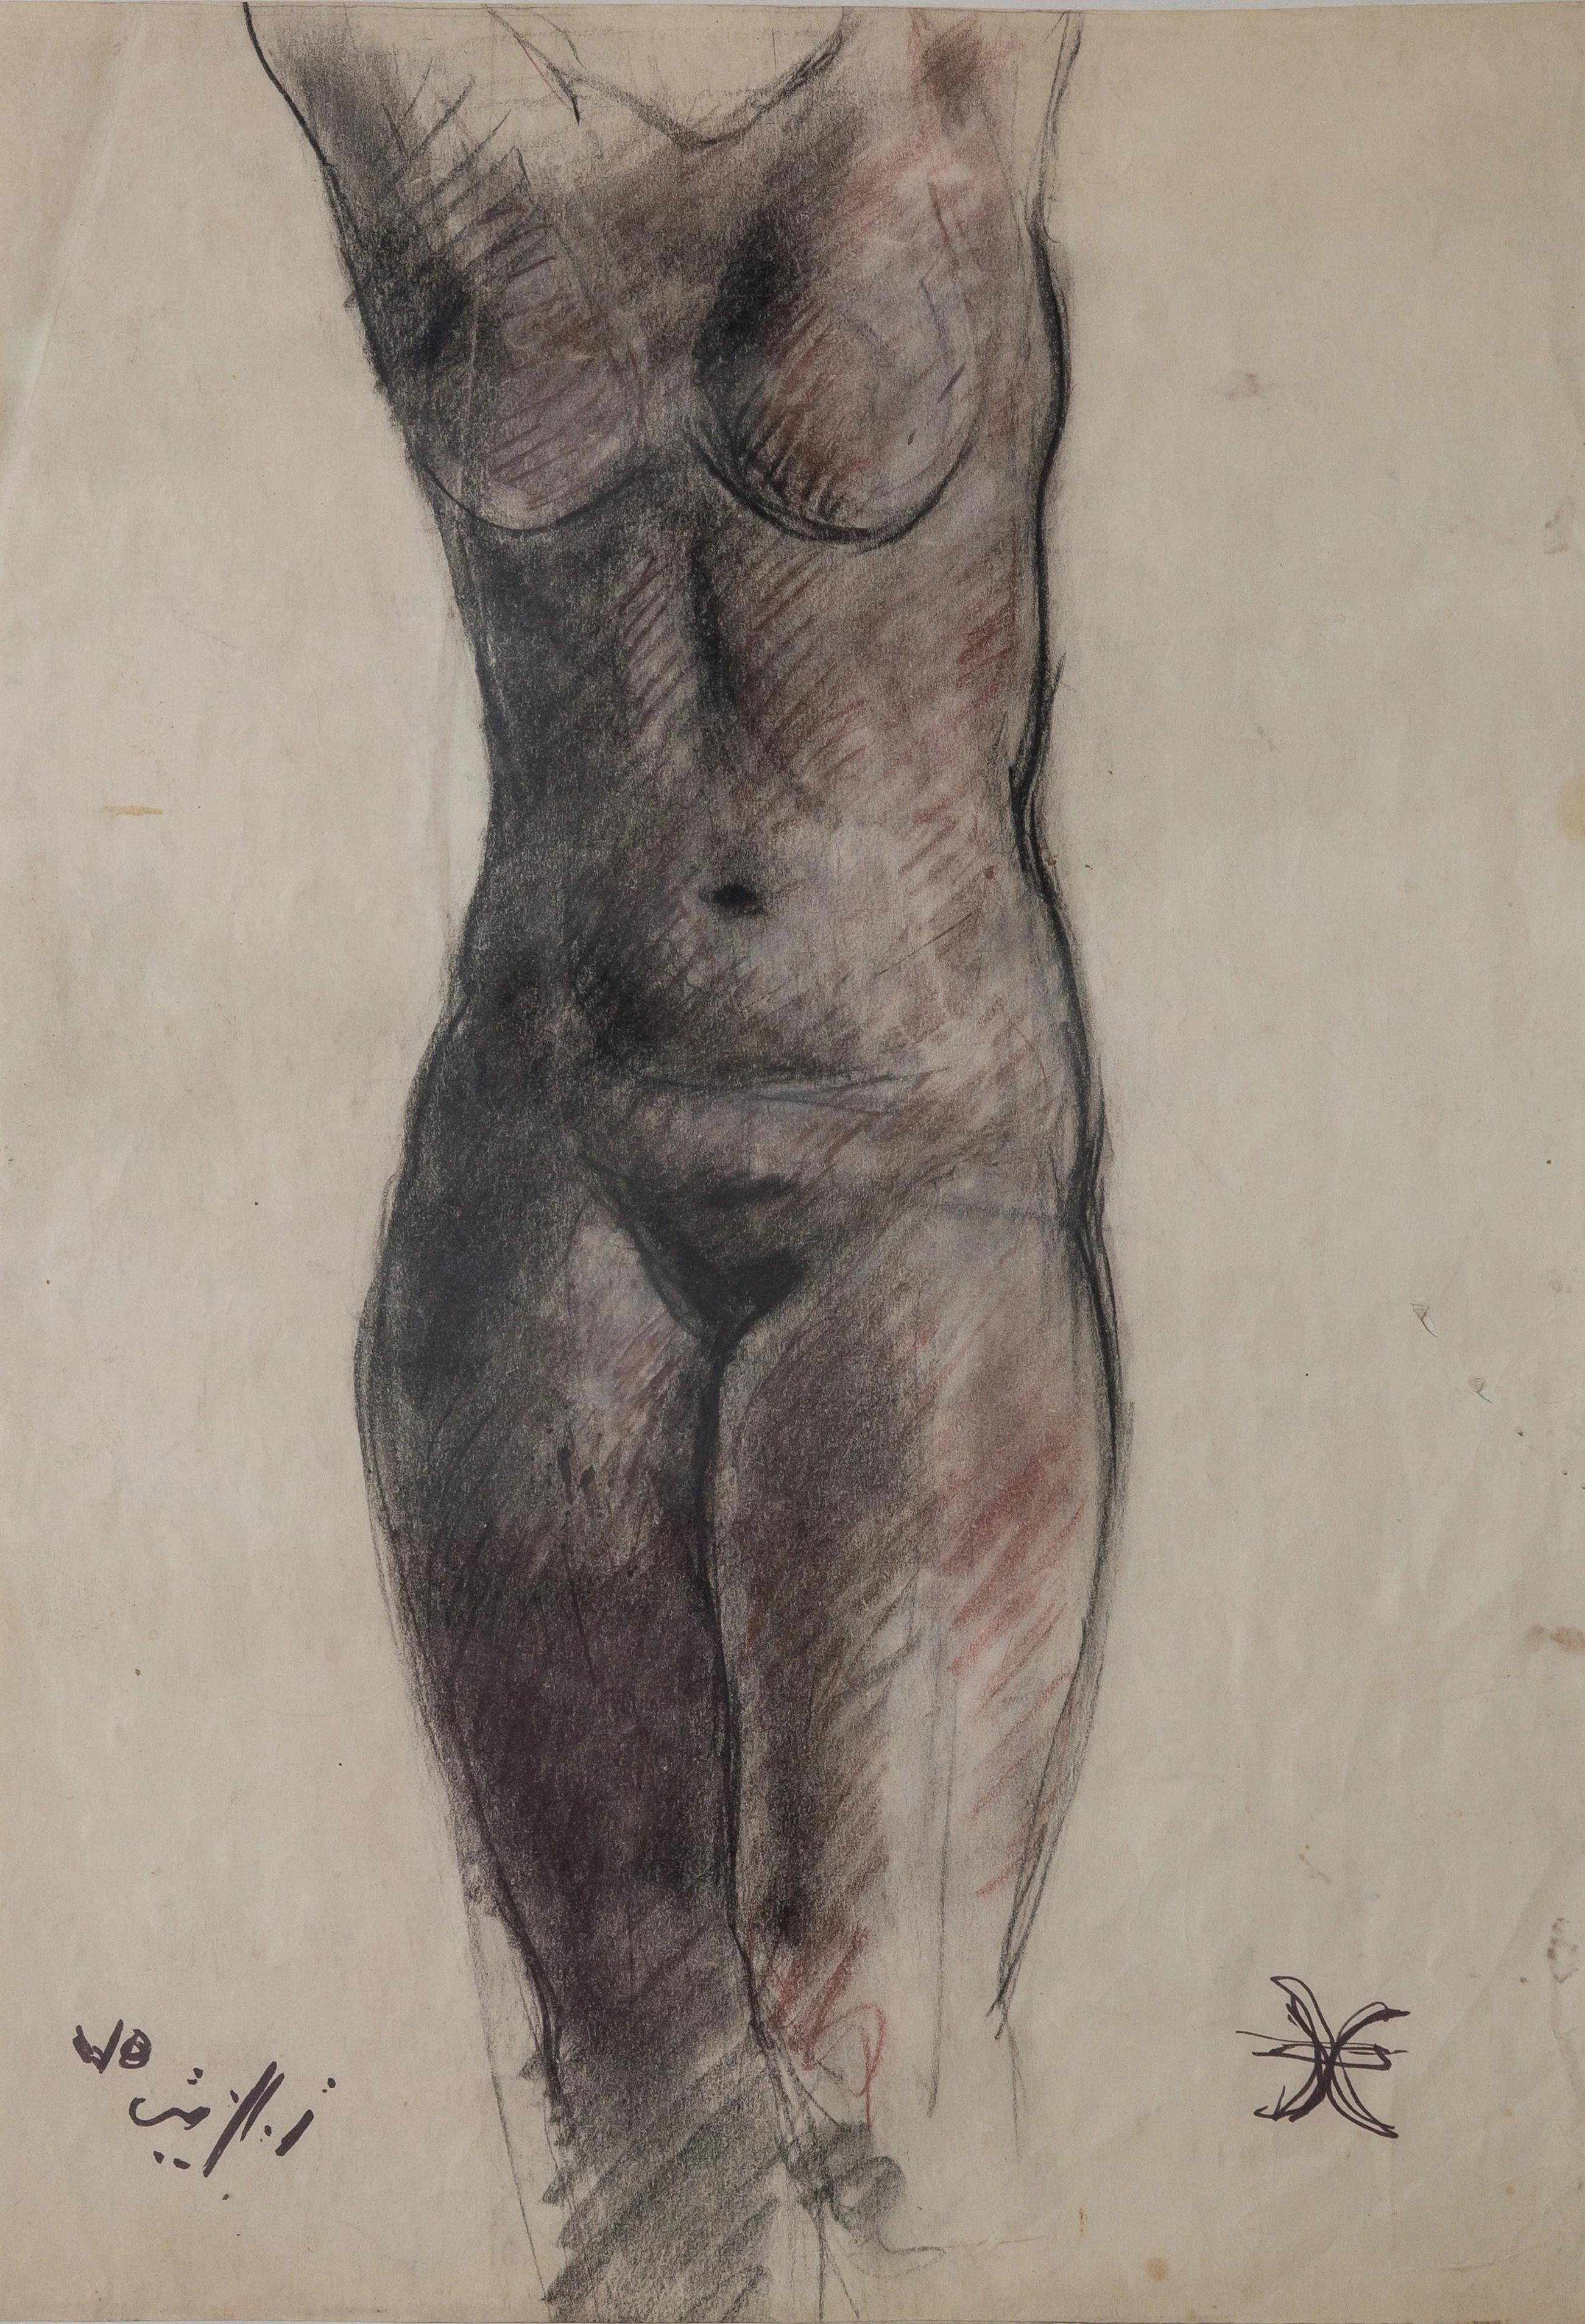 "Nude Torso" (FRAMED) Pencil Drawing 18" x 12" in (1975) by Zaccaria Zeini

Medium: pencil on paper
Signed and dated 

Zaccaria El Zeini (1932 - 1993) was raised in the popular district of Sayyida Zienab in Old Cairo and graduated from the Faculty